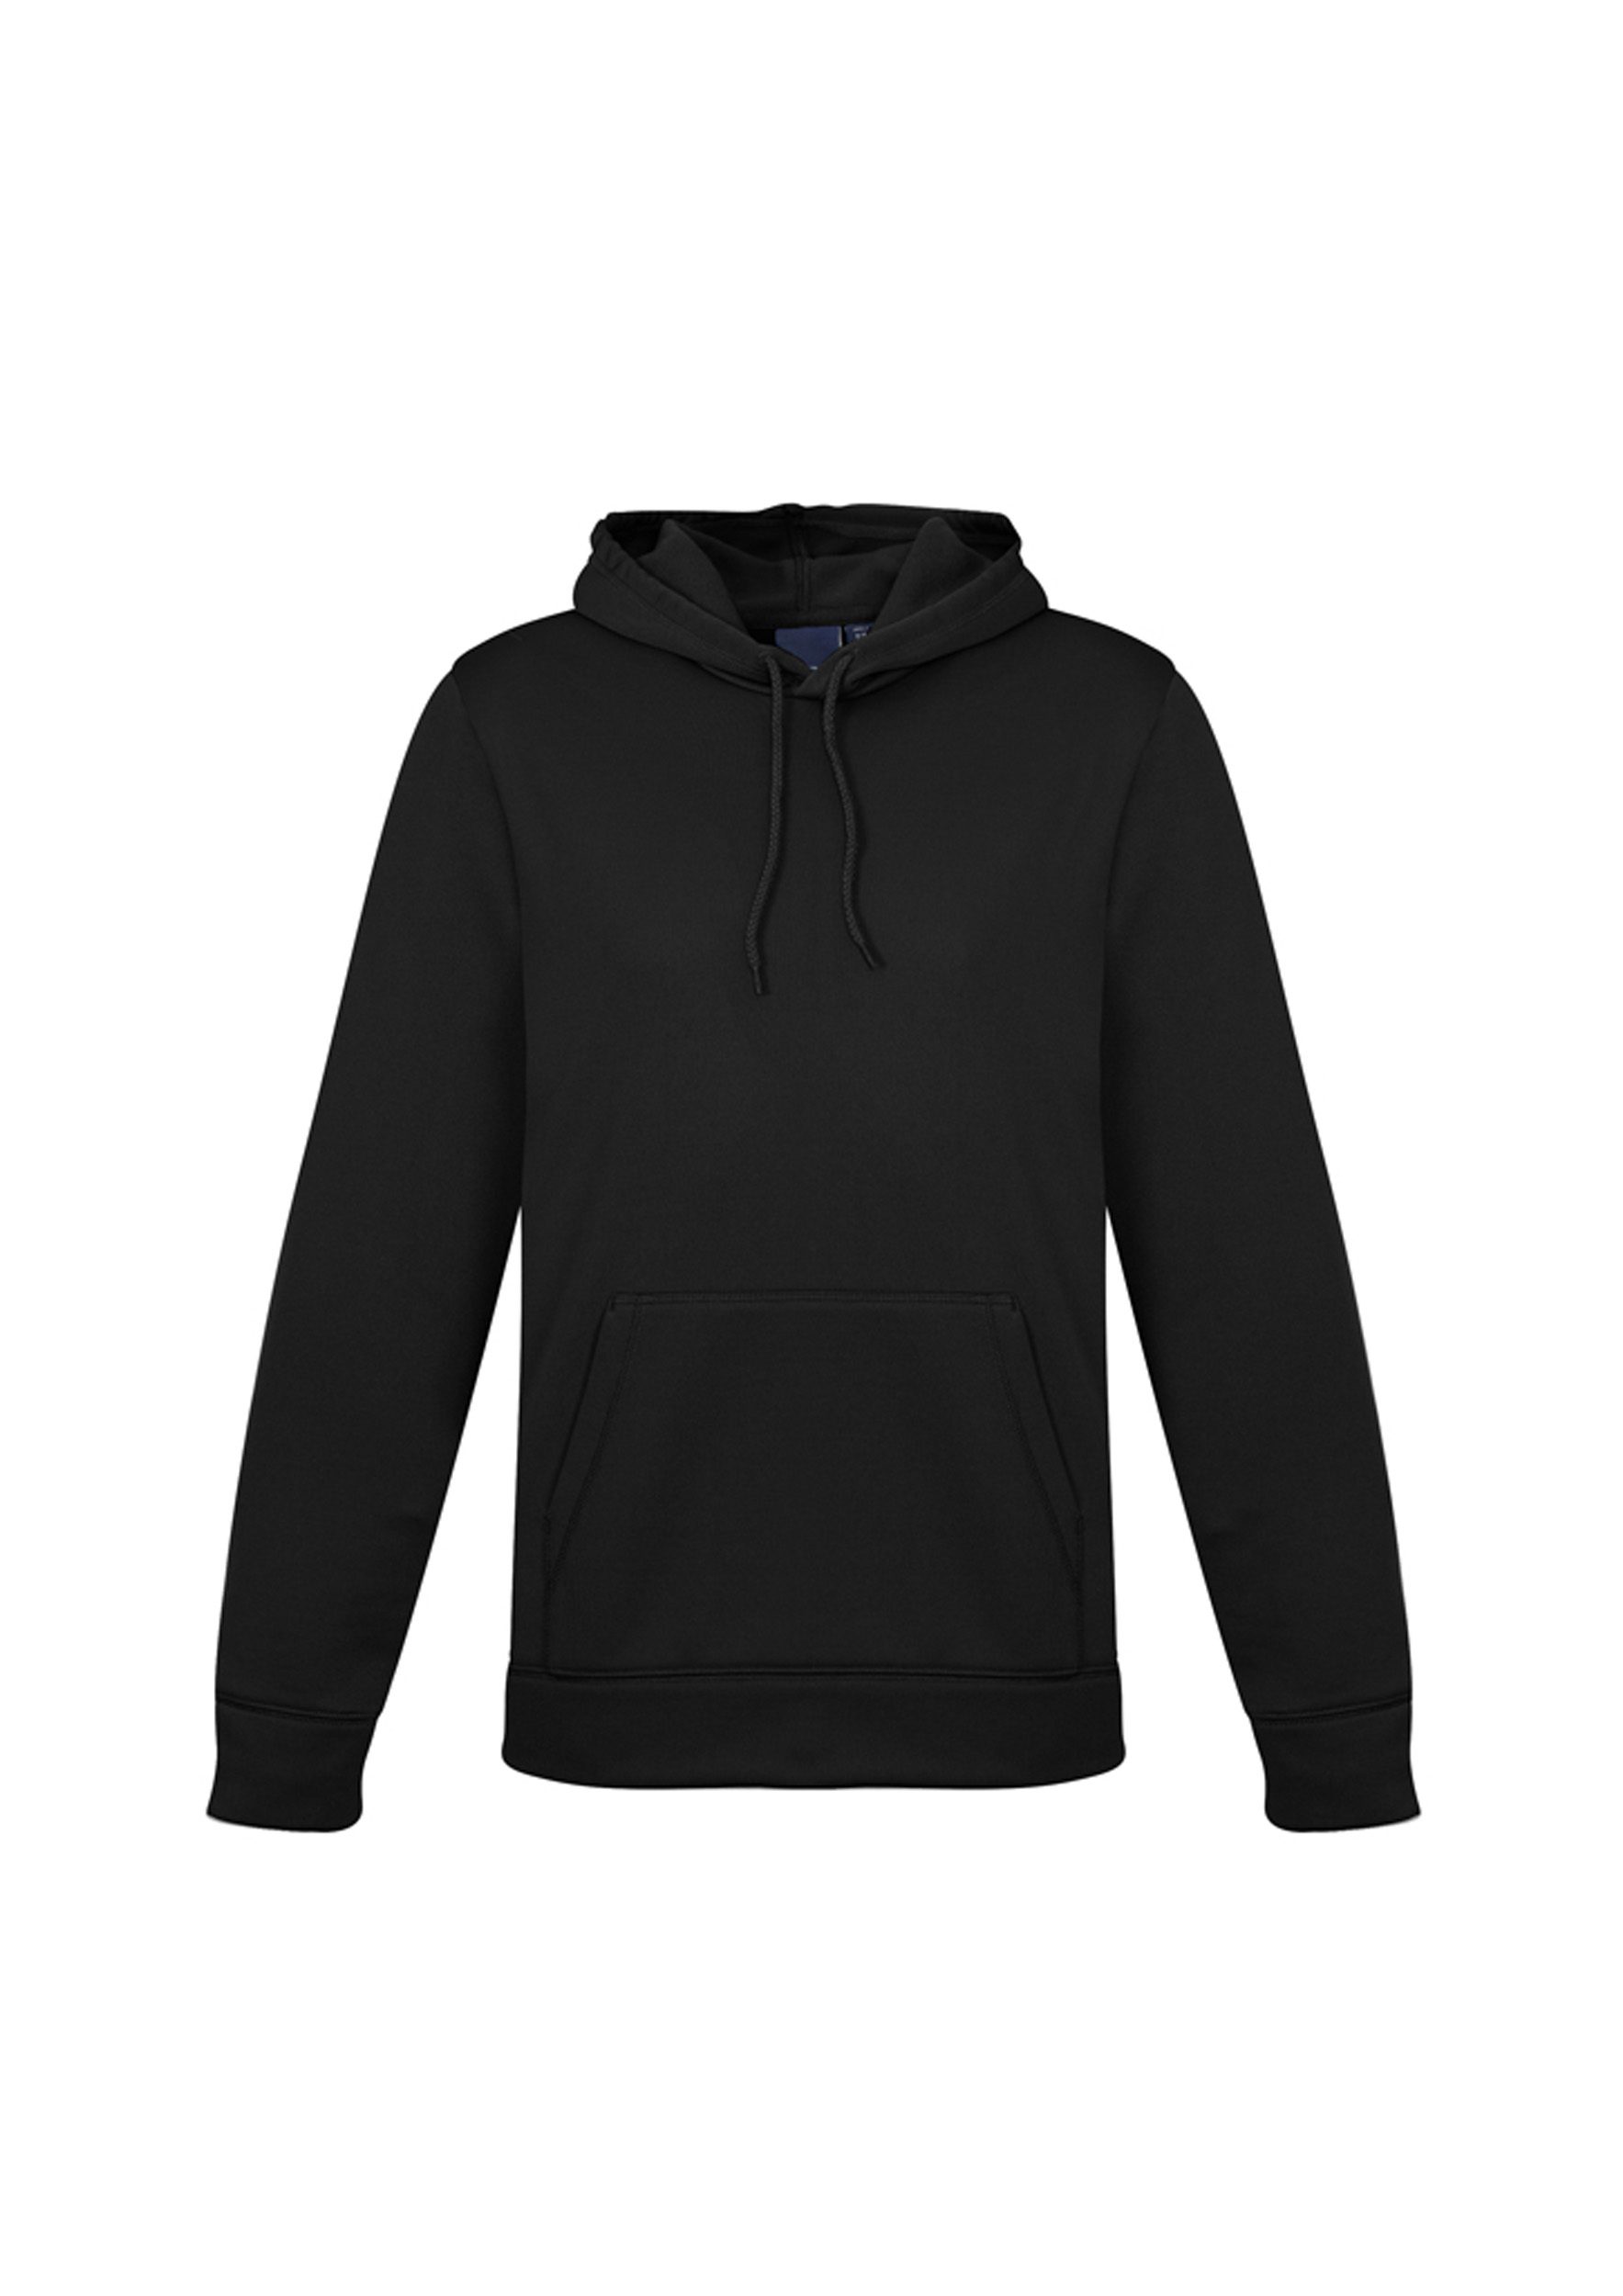 Biz Collection Ladies Hype Pull-On Hoodie #SW239LL Black